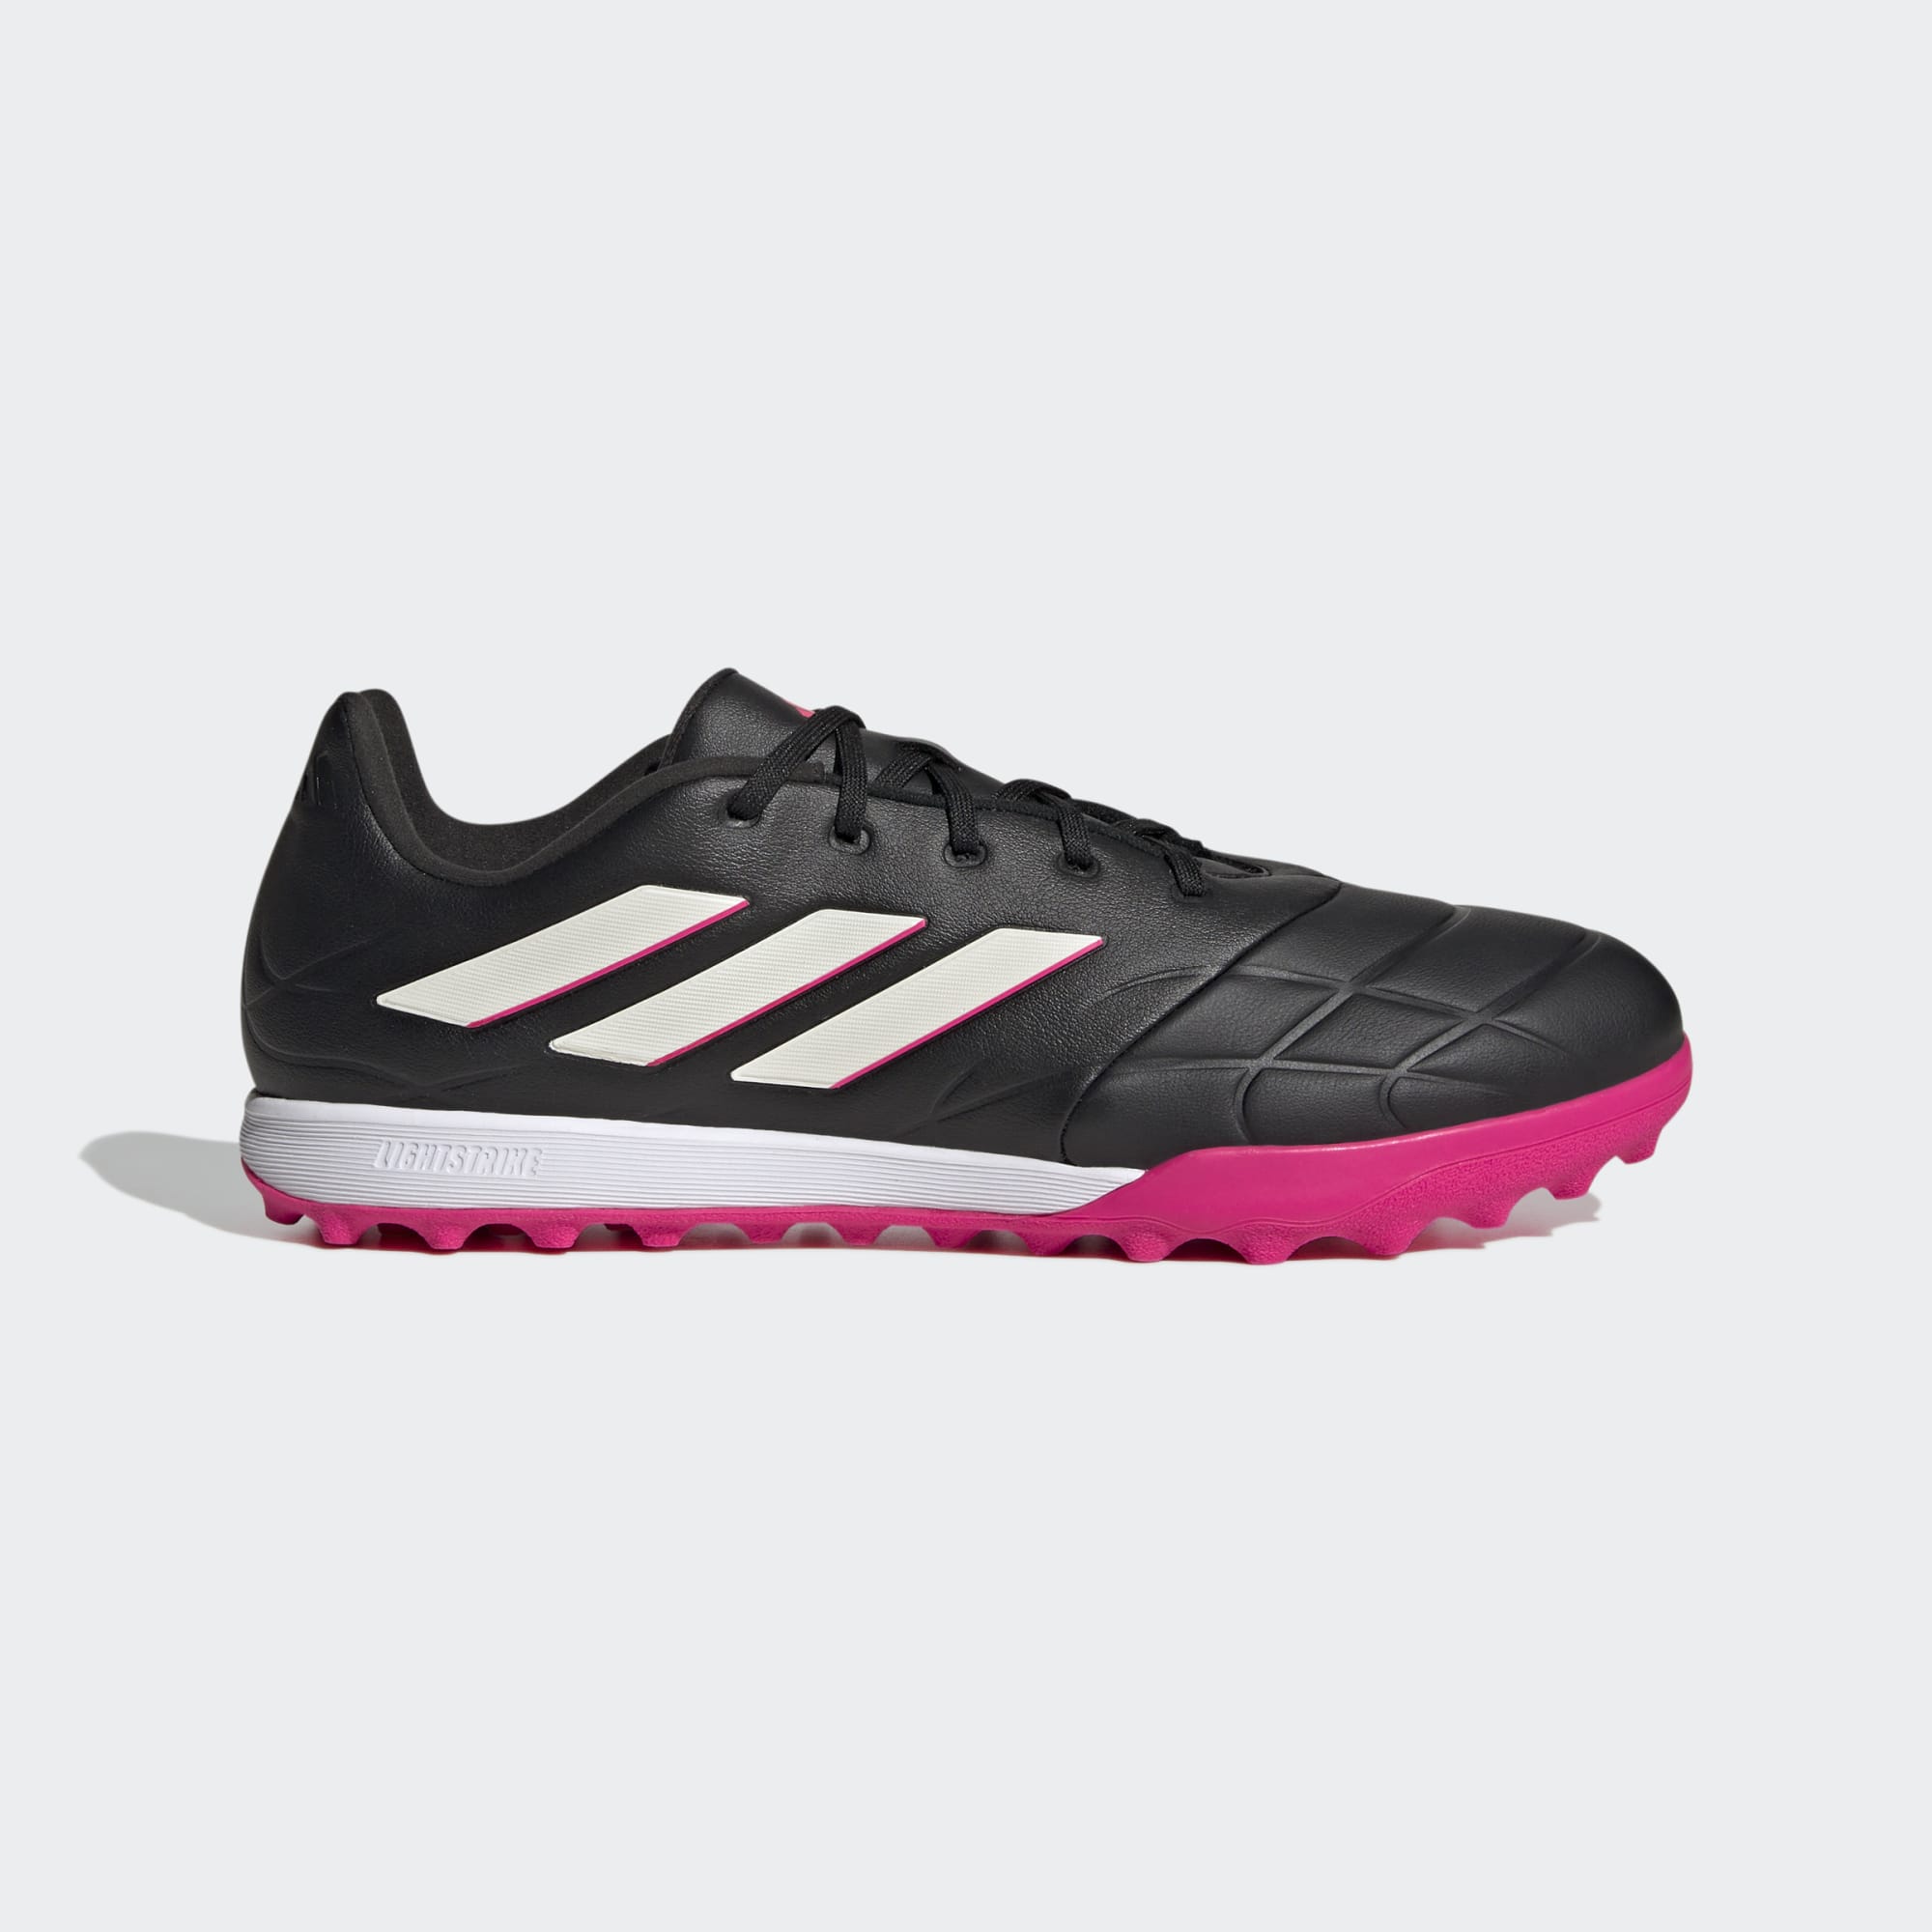 adidas Copa Pure.3 Turf Soccer Shoes Men's